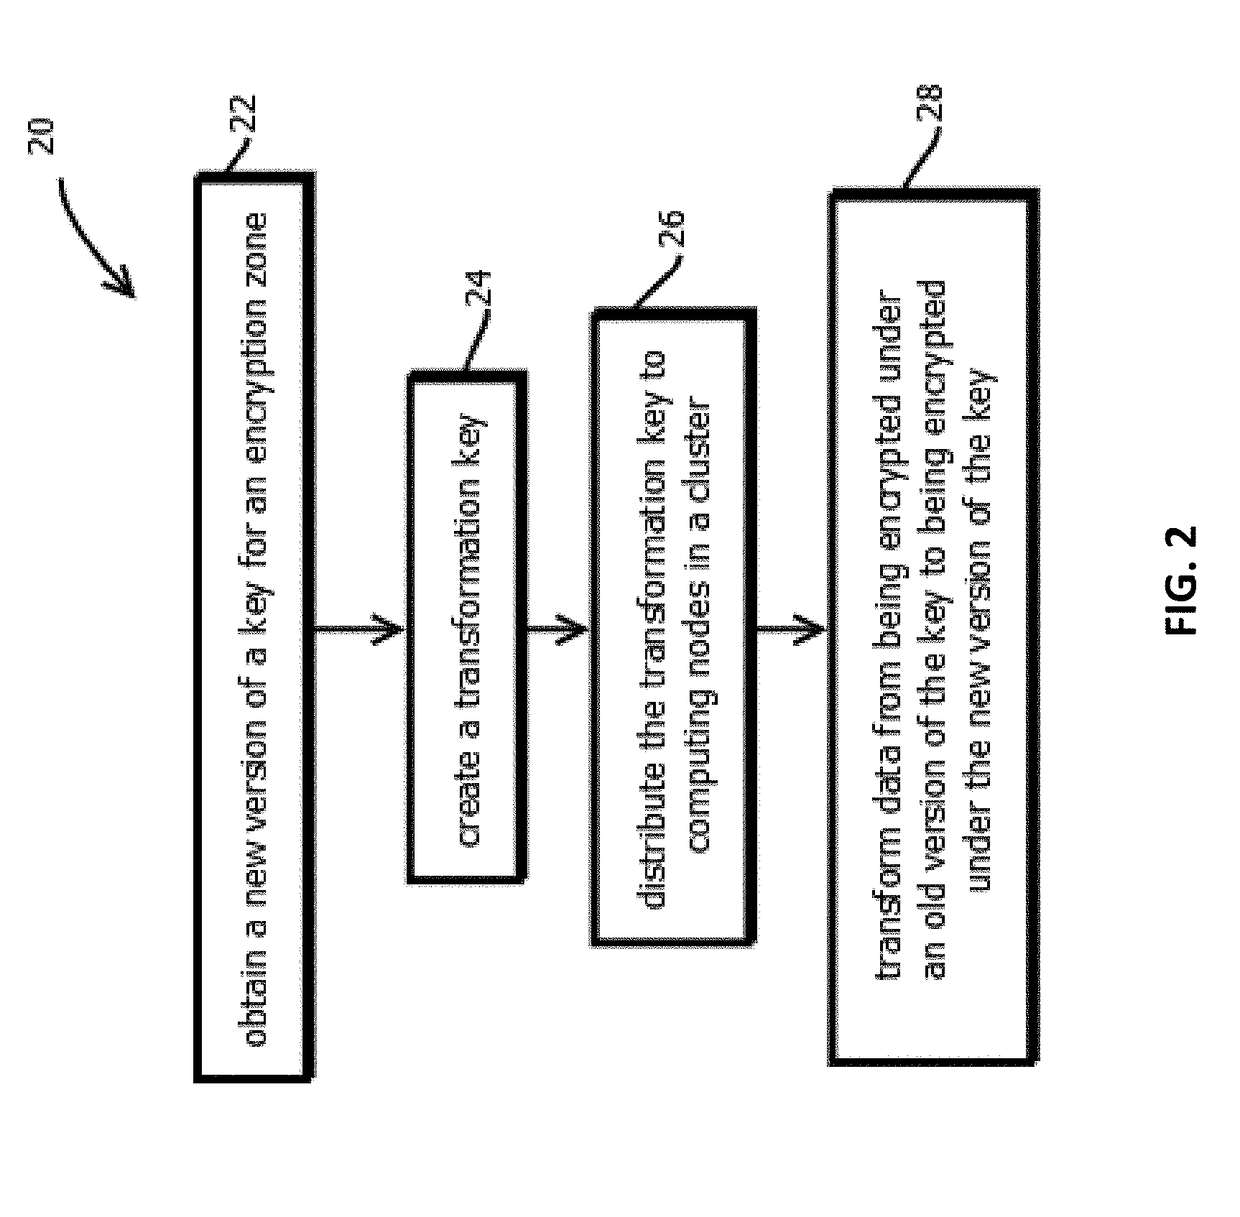 Method and system for secure delegated access to encrypted data in big data computing clusters